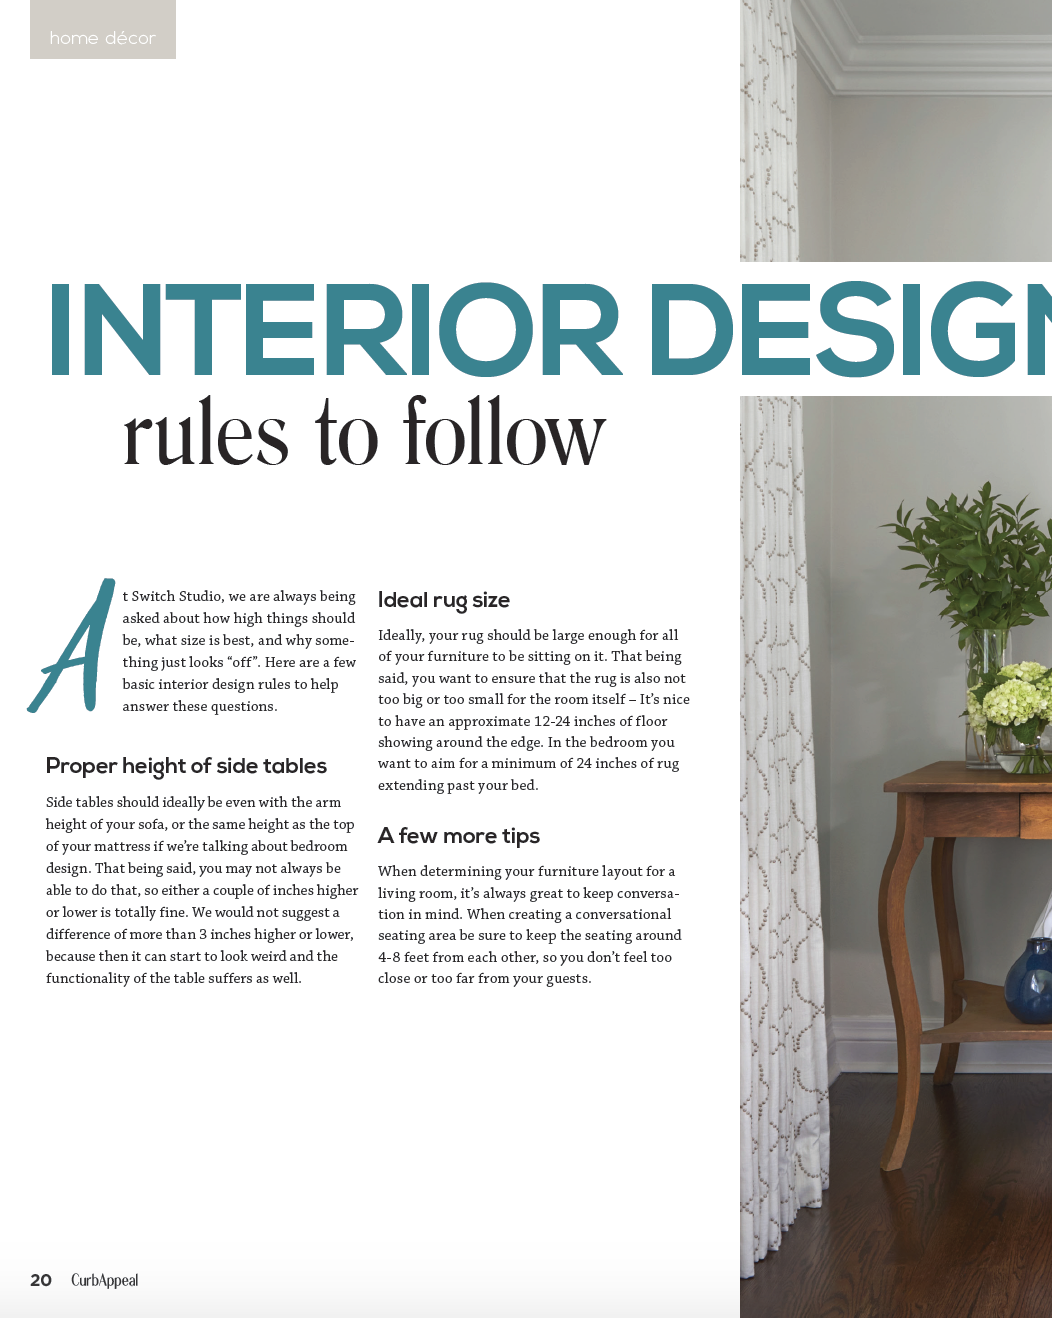 Interior Design rules to follow article